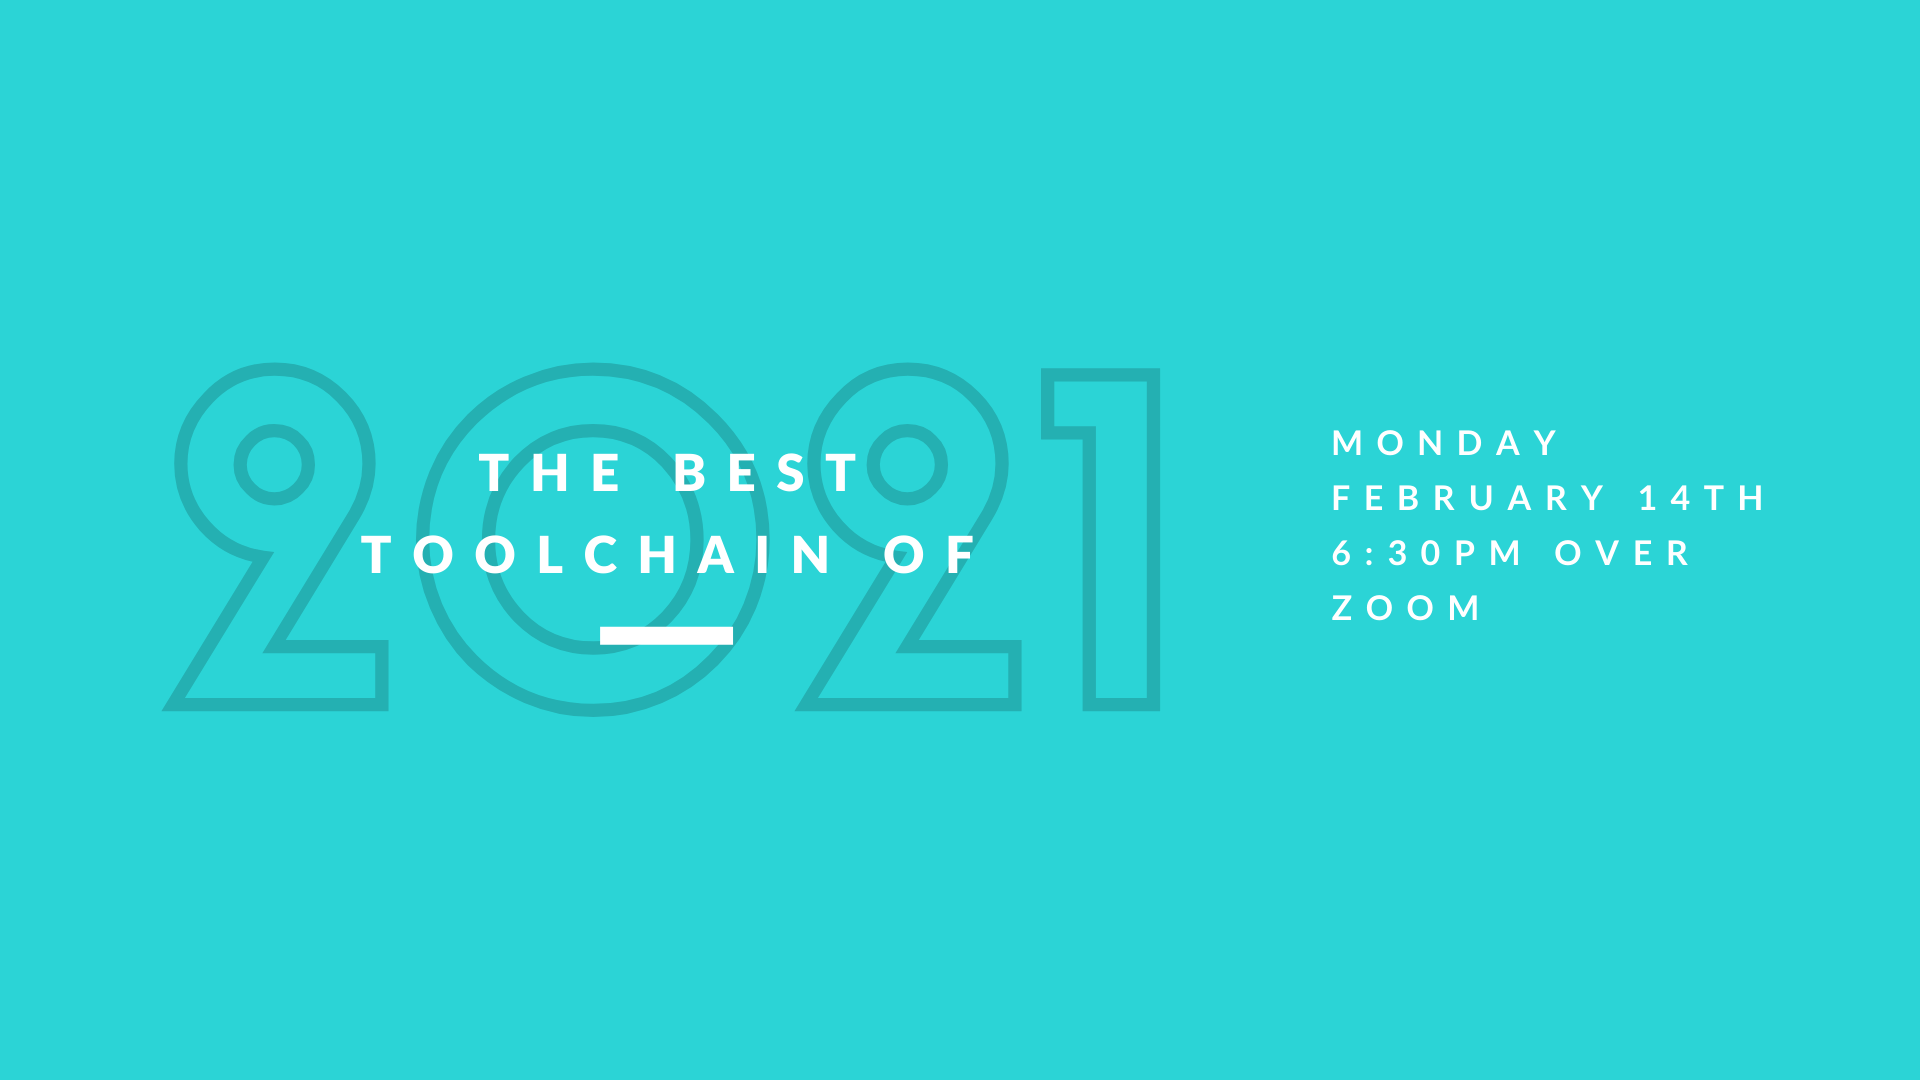 The Best Toolchain Of 2021